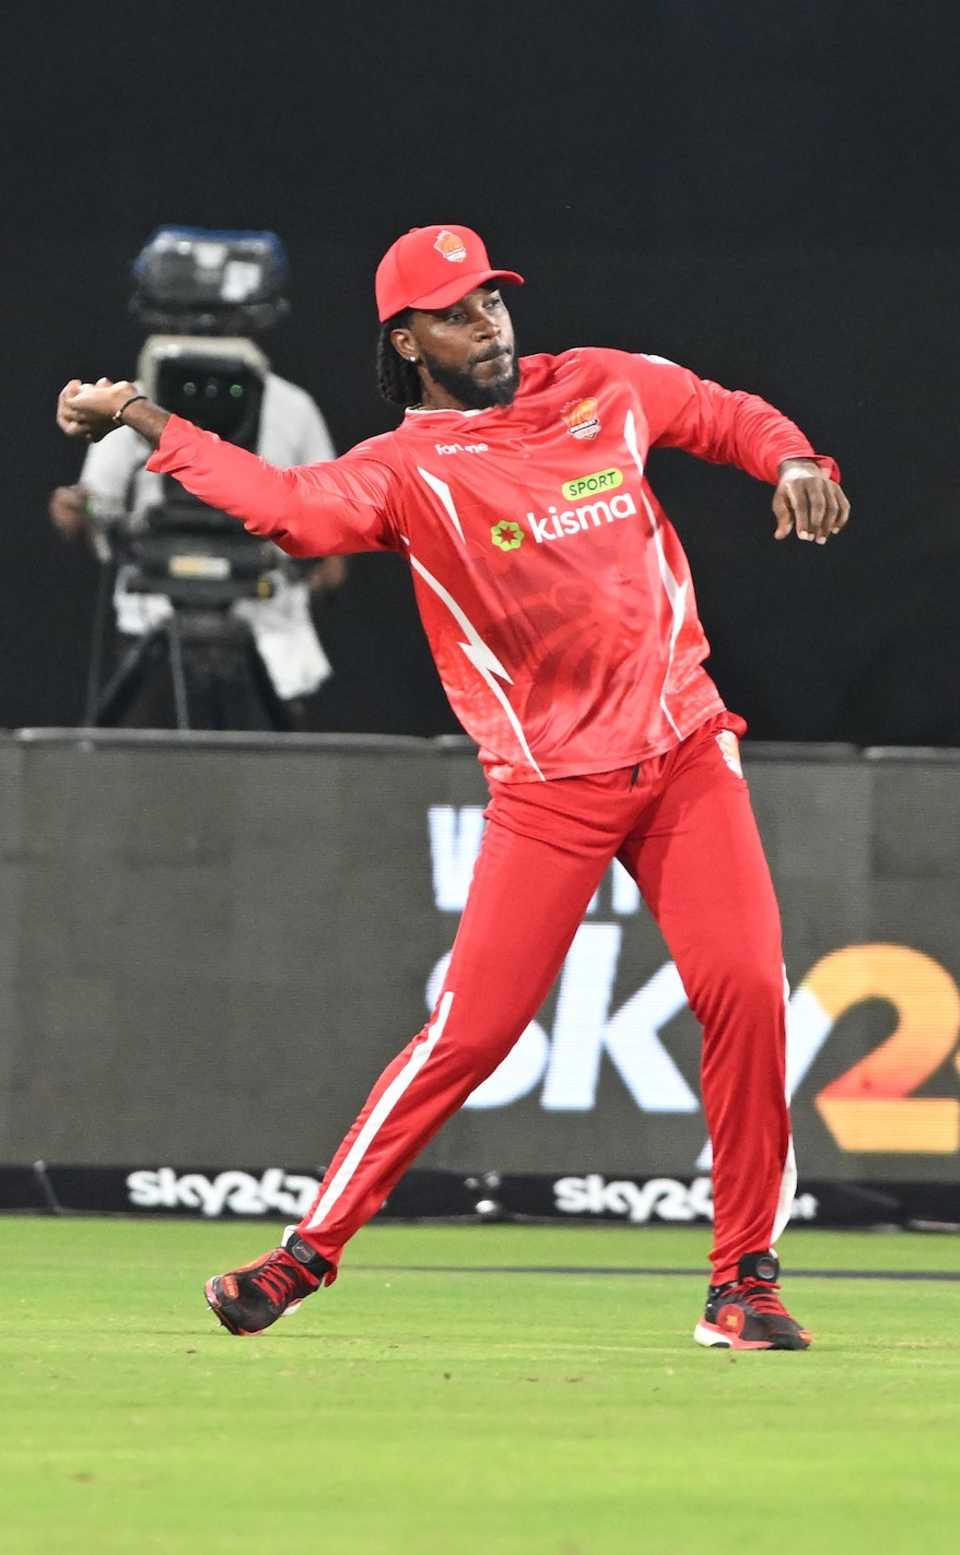 Chris Gayle throws the ball back